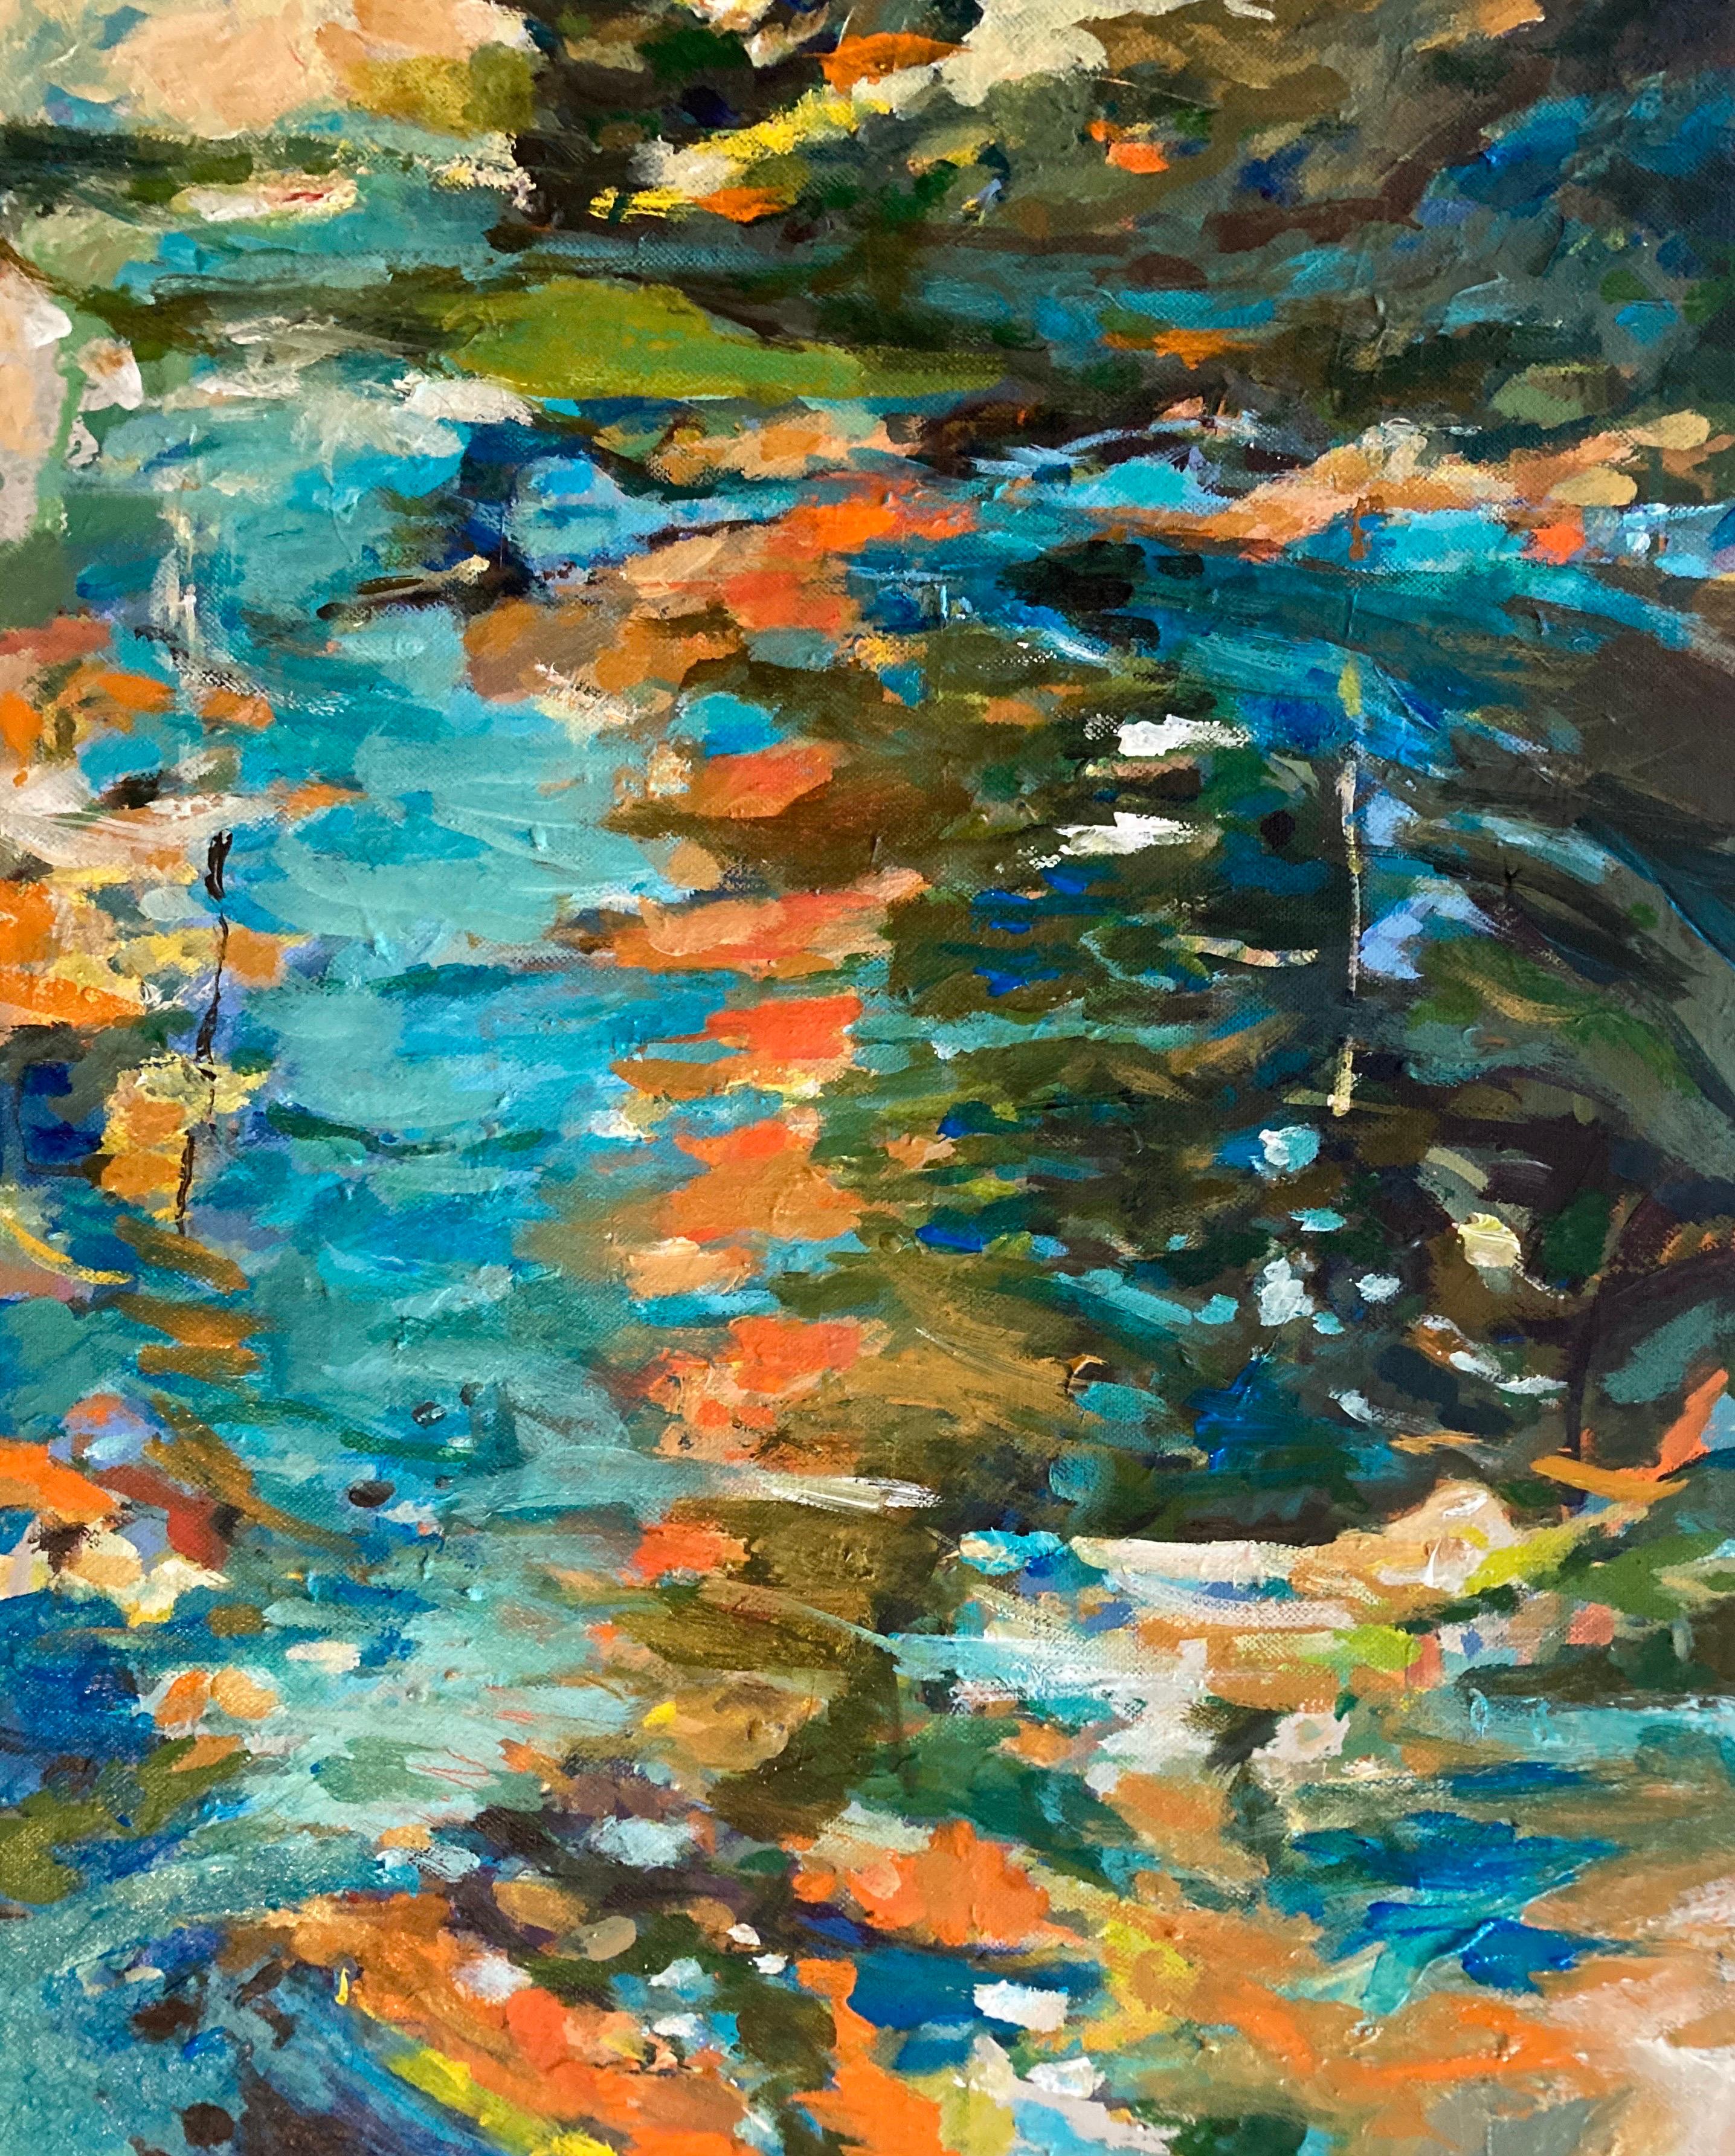 Michele Zuzalek Landscape Painting - Impressionist abstract painting in vivid blues, oranges and greens 